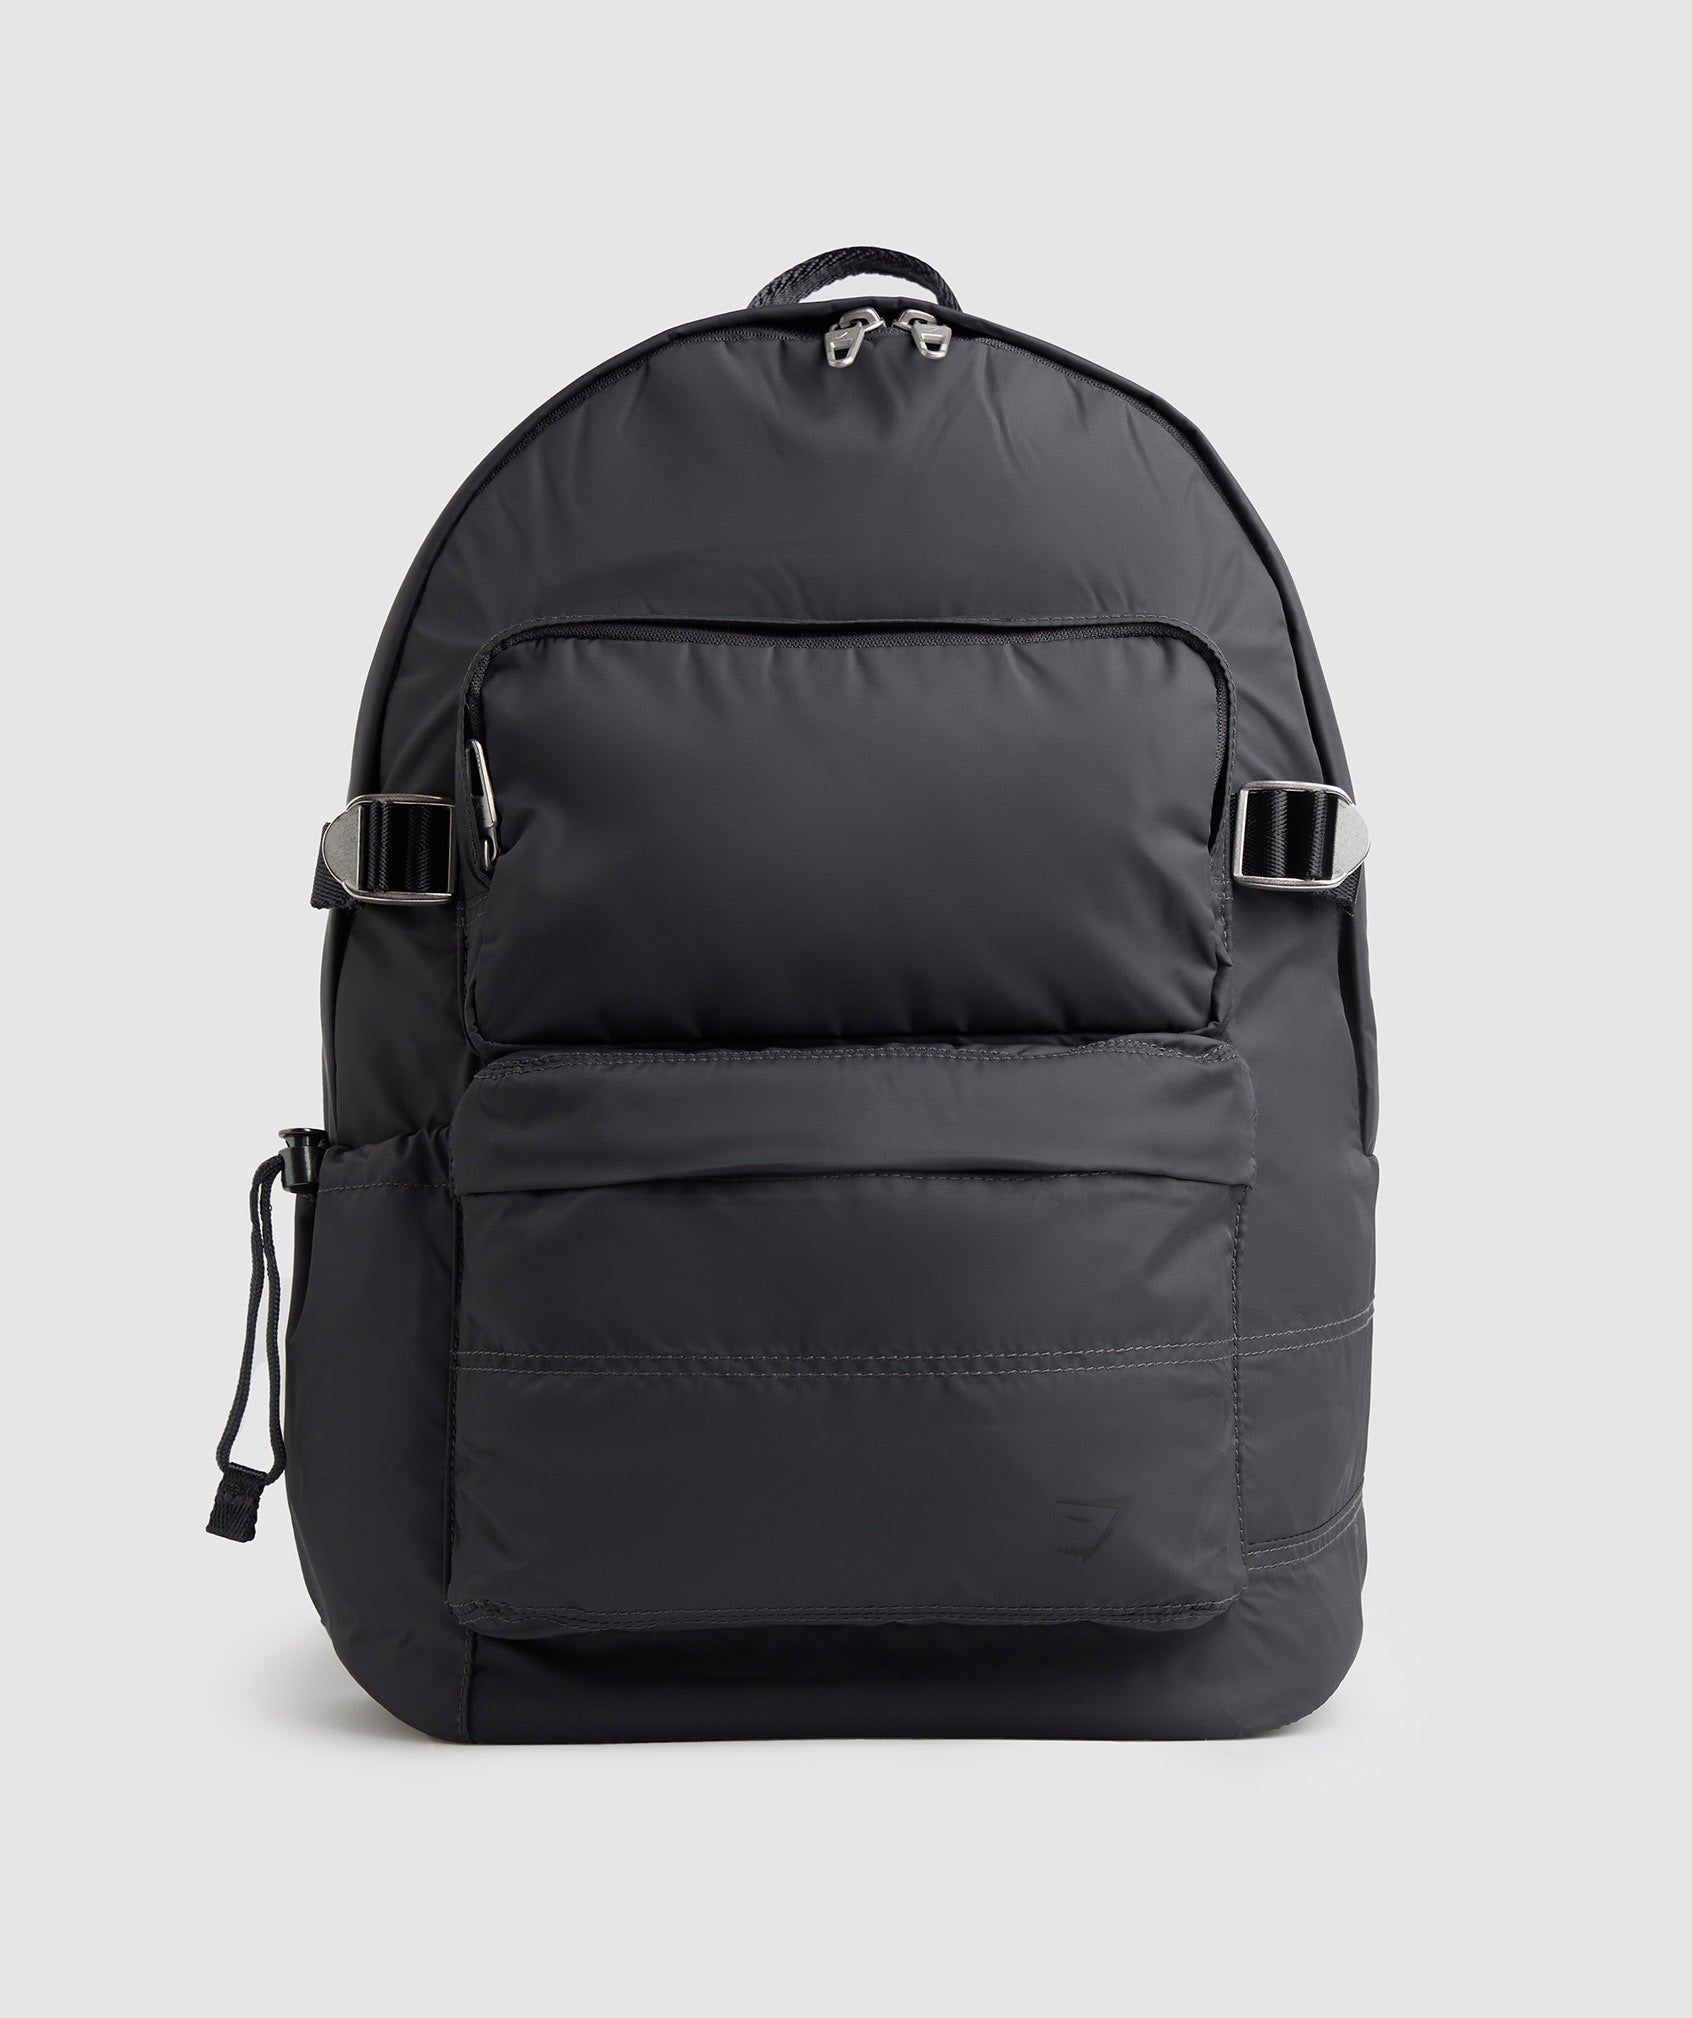 Premium Lifestyle Backpack in {{variantColor} is out of stock